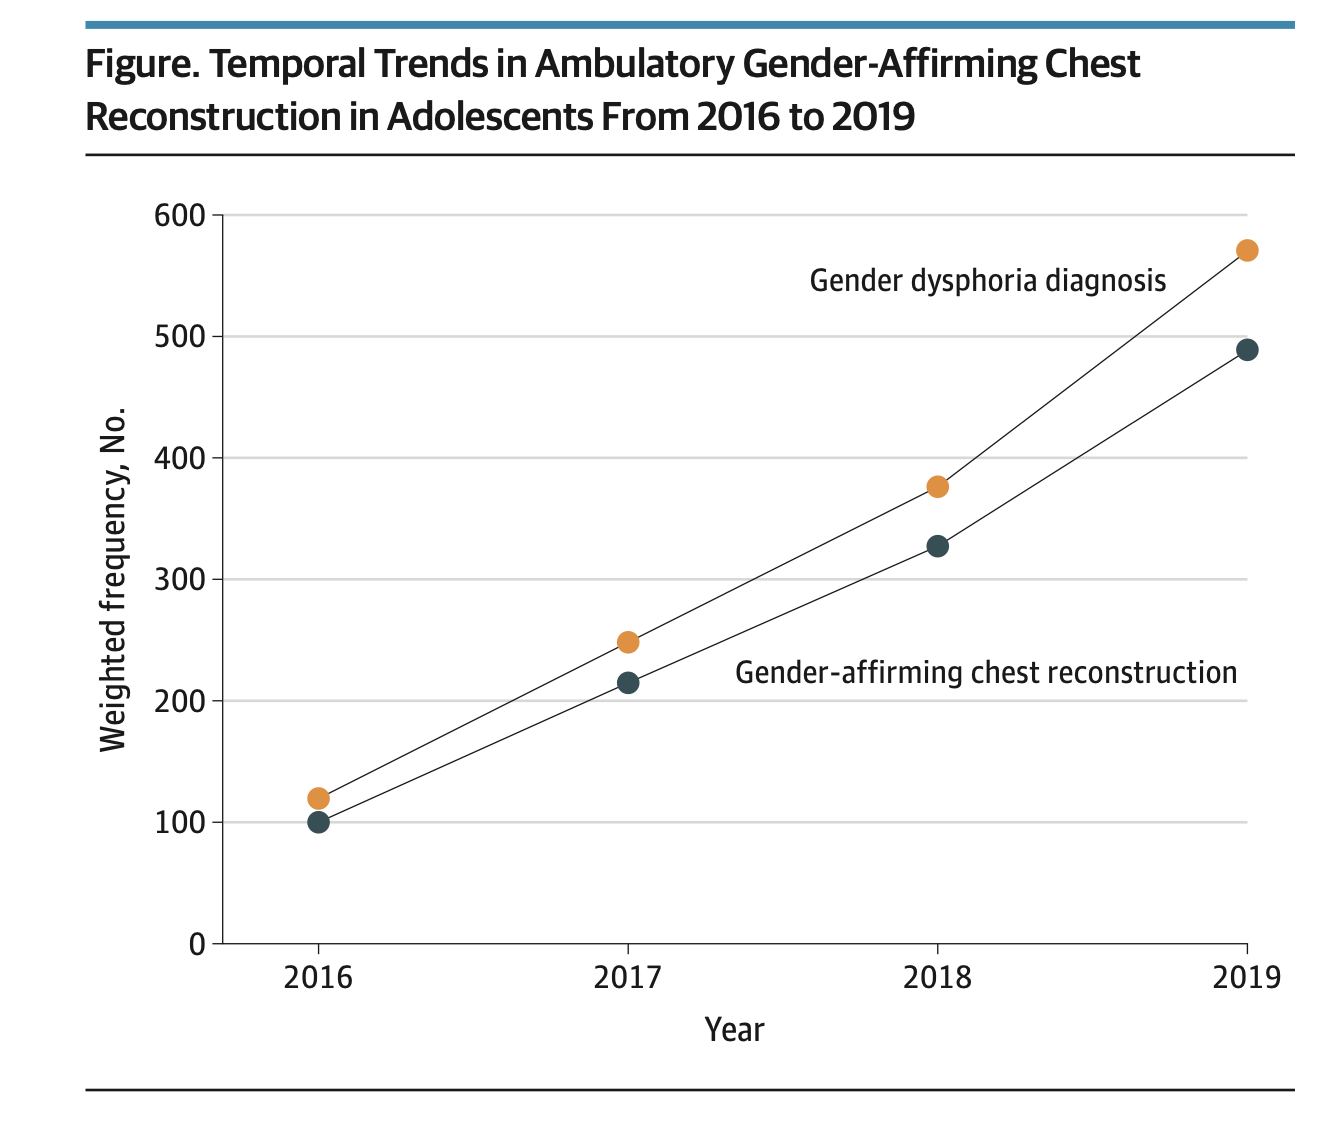 Figure. Temporal Trends in Ambulatory Gender-Affirming Chest Reconstruction in Adolescents From 2016 to 2019